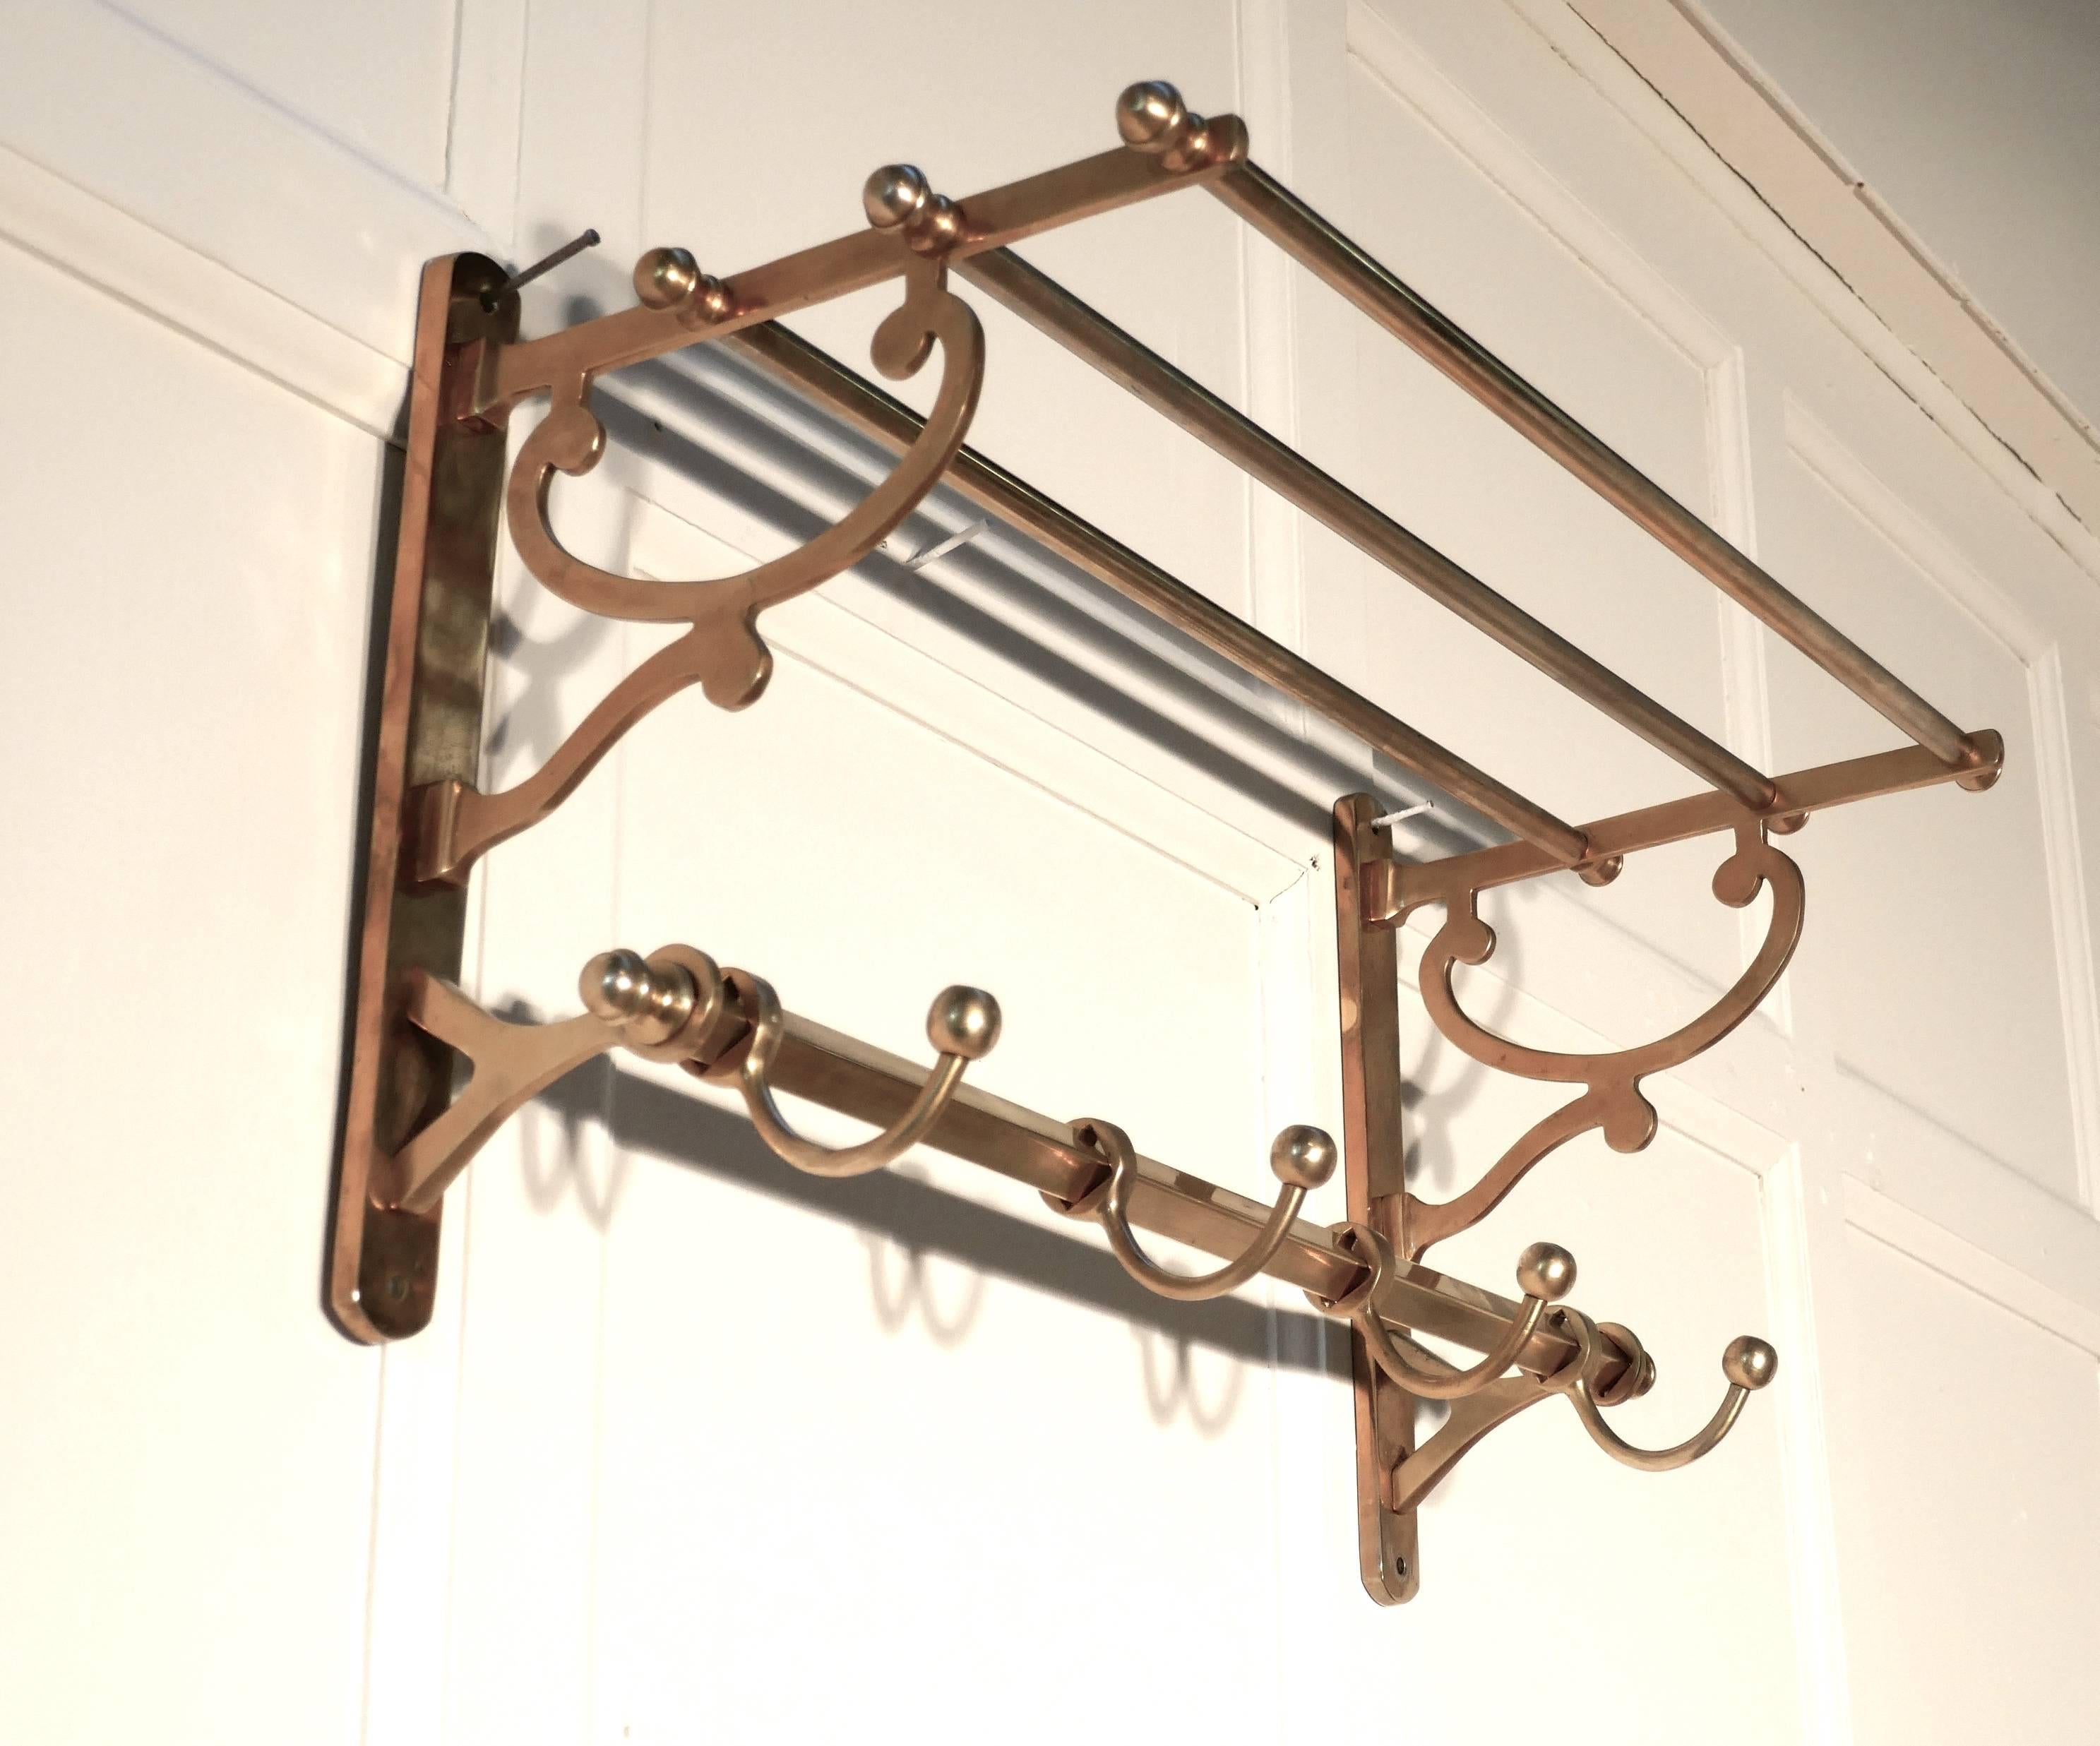 Small French Art Deco brass hat and coat rack, Pullman Railway train style

 This Art Deco style hat and coat rack has three sliding hooks and an upper railed shelf 
Racks just like these were used on French railway trains just like the ones on